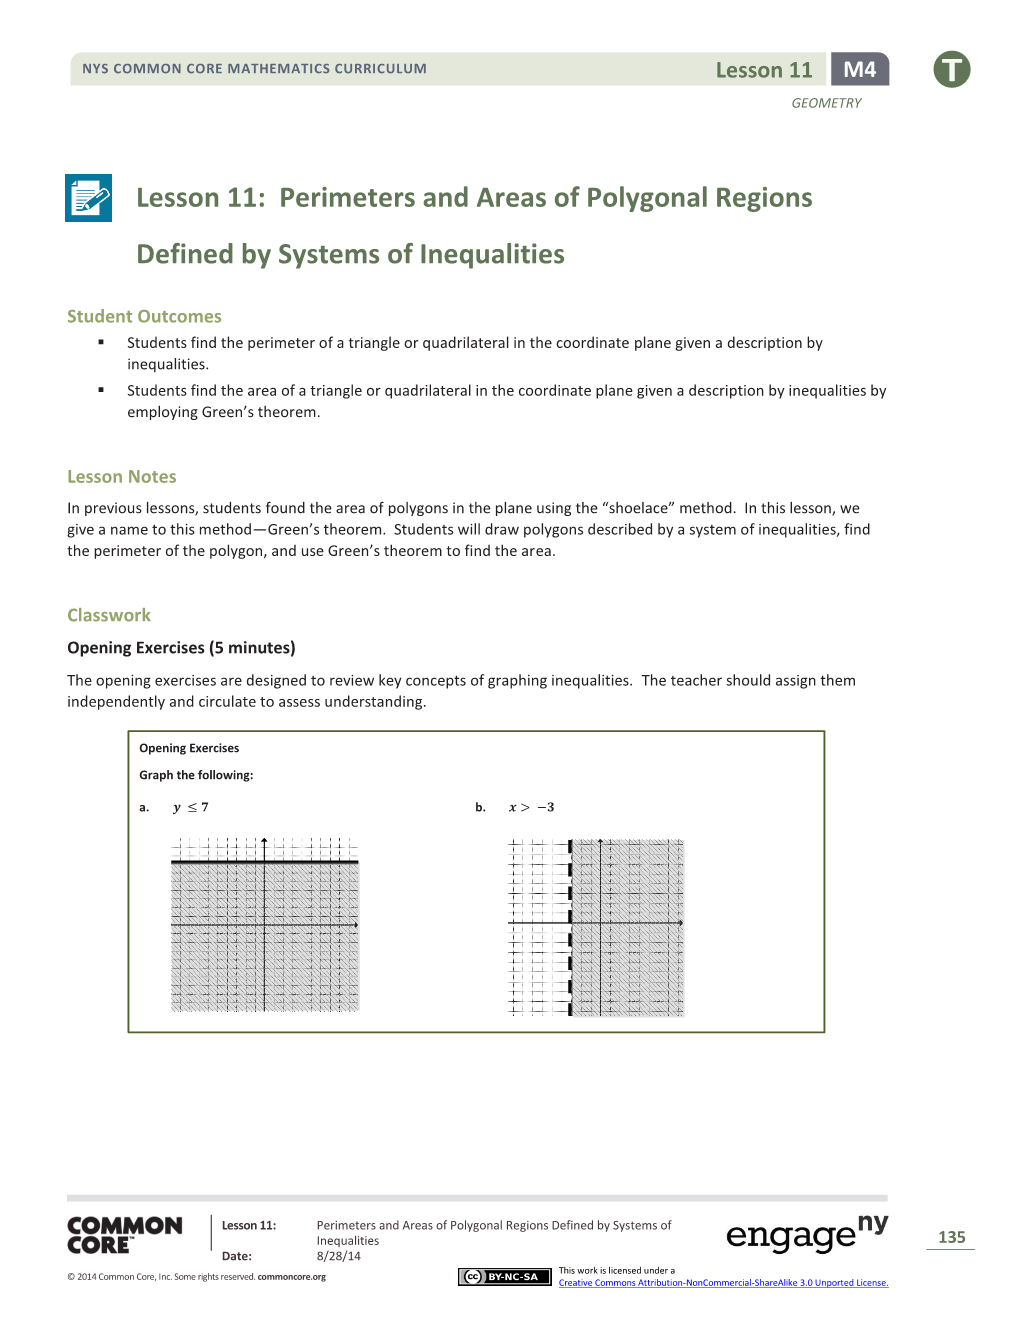 Lesson 11: Perimeters and Areas of Polygonal Regions Defined by Systems of Inequalities